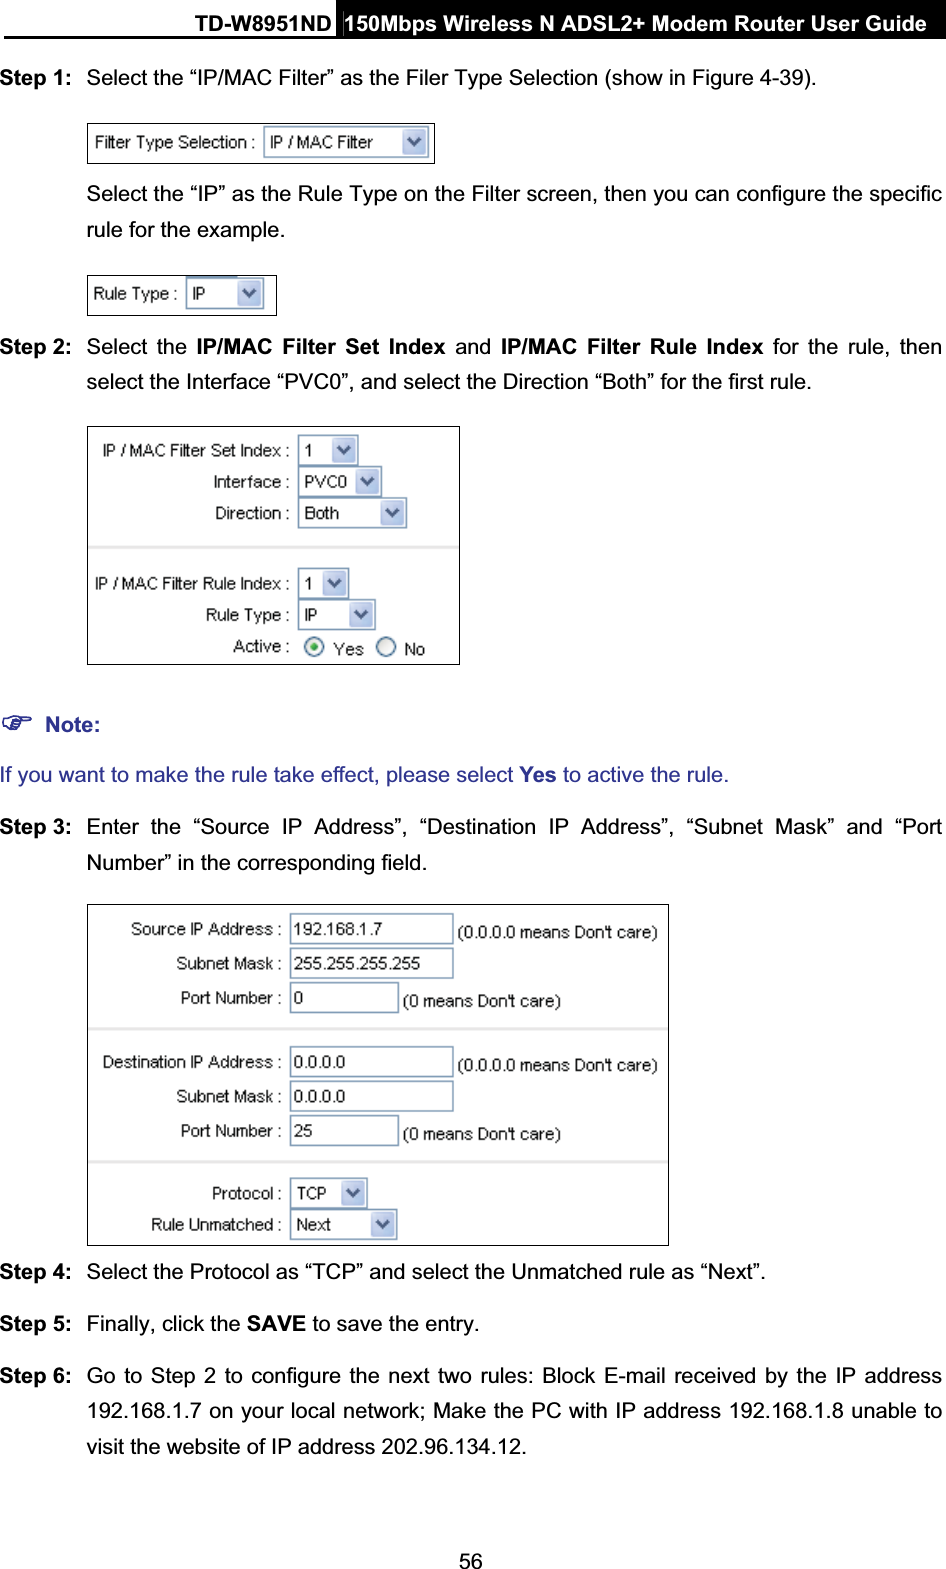 TD-W8951ND  150Mbps Wireless N ADSL2+ Modem Router User Guide56Step 1:  Select the “IP/MAC Filter” as the Filer Type Selection (show in Figure 4-39). Select the “IP” as the Rule Type on the Filter screen, then you can configure the specific rule for the example. Step 2:  Select the IP/MAC Filter Set Index and IP/MAC Filter Rule Index for the rule, then select the Interface “PVC0”, and select the Direction “Both” for the first rule. )Note:If you want to make the rule take effect, please select Yes to active the rule. Step 3:  Enter the “Source IP Address”, “Destination IP Address”, “Subnet Mask” and “Port Number” in the corresponding field. Step 4:  Select the Protocol as “TCP” and select the Unmatched rule as “Next”.Step 5:  Finally, click the SAVE to save the entry.Step 6:  Go to Step 2 to configure the next two rules: Block E-mail received by the IP address 192.168.1.7 on your local network; Make the PC with IP address 192.168.1.8 unable to visit the website of IP address 202.96.134.12.